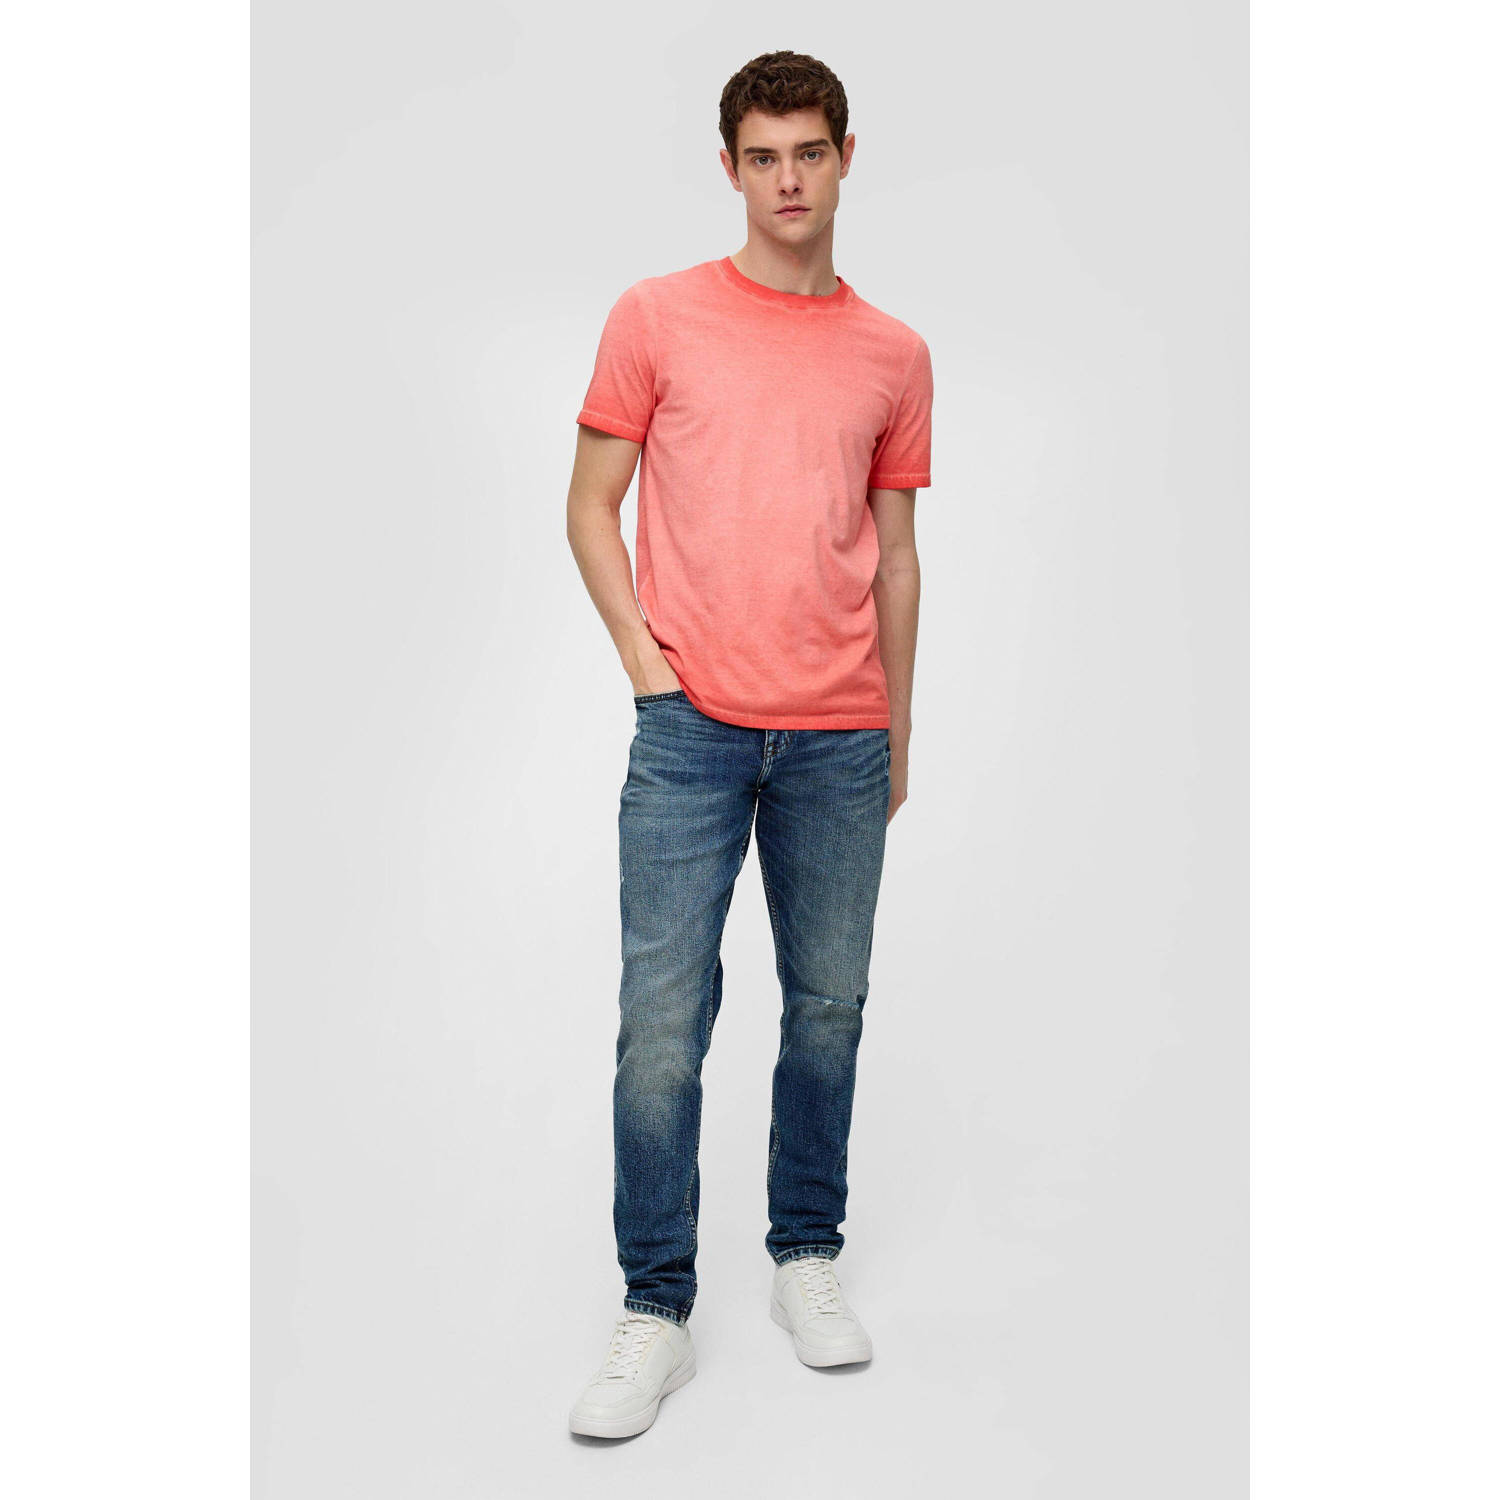 Q S by s.Oliver regular fit jeans blauw